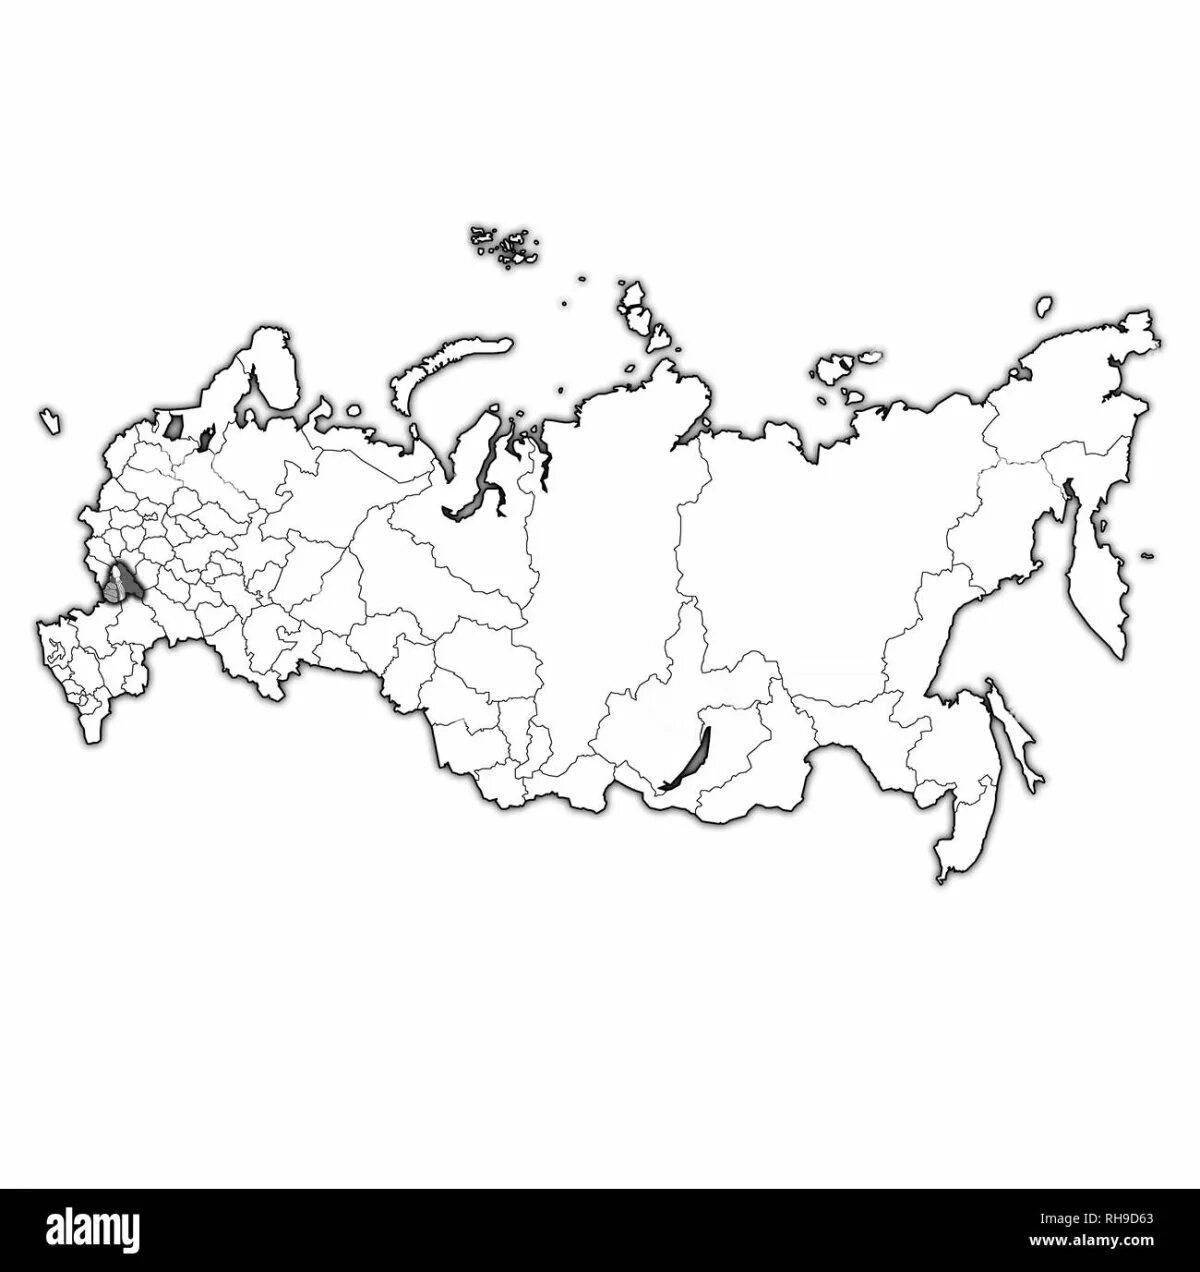 Impressive map of russia with regions